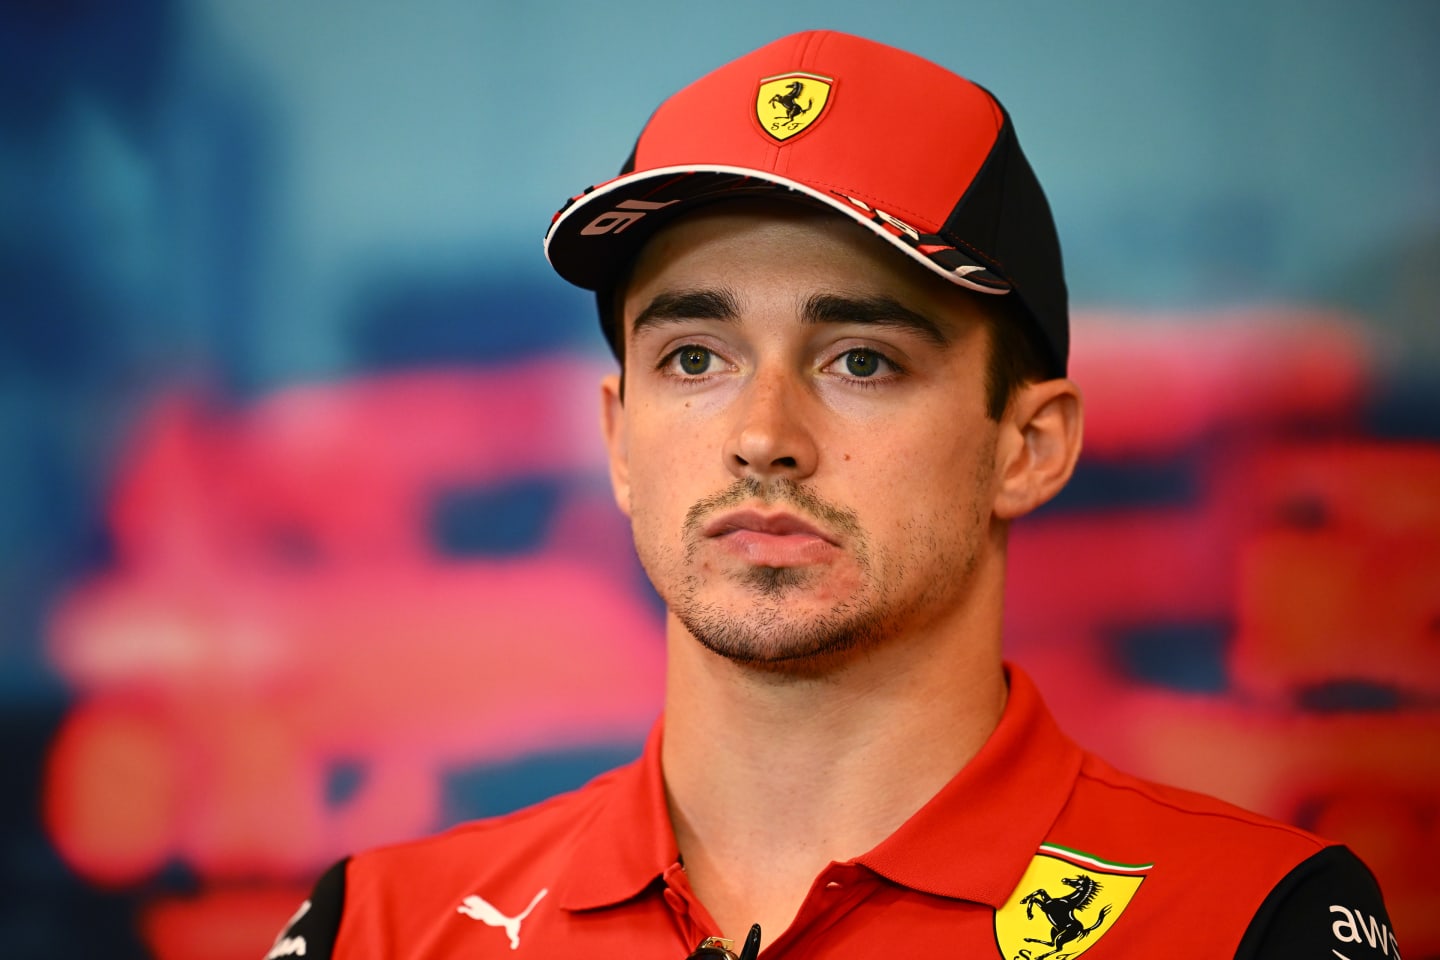 MONTE-CARLO, MONACO - MAY 27: Charles Leclerc of Monaco and Ferrari looks on in the Drivers Press Conference prior to practice ahead of the F1 Grand Prix of Monaco at Circuit de Monaco on May 27, 2022 in Monte-Carlo, Monaco. (Photo by Clive Mason/Getty Images)